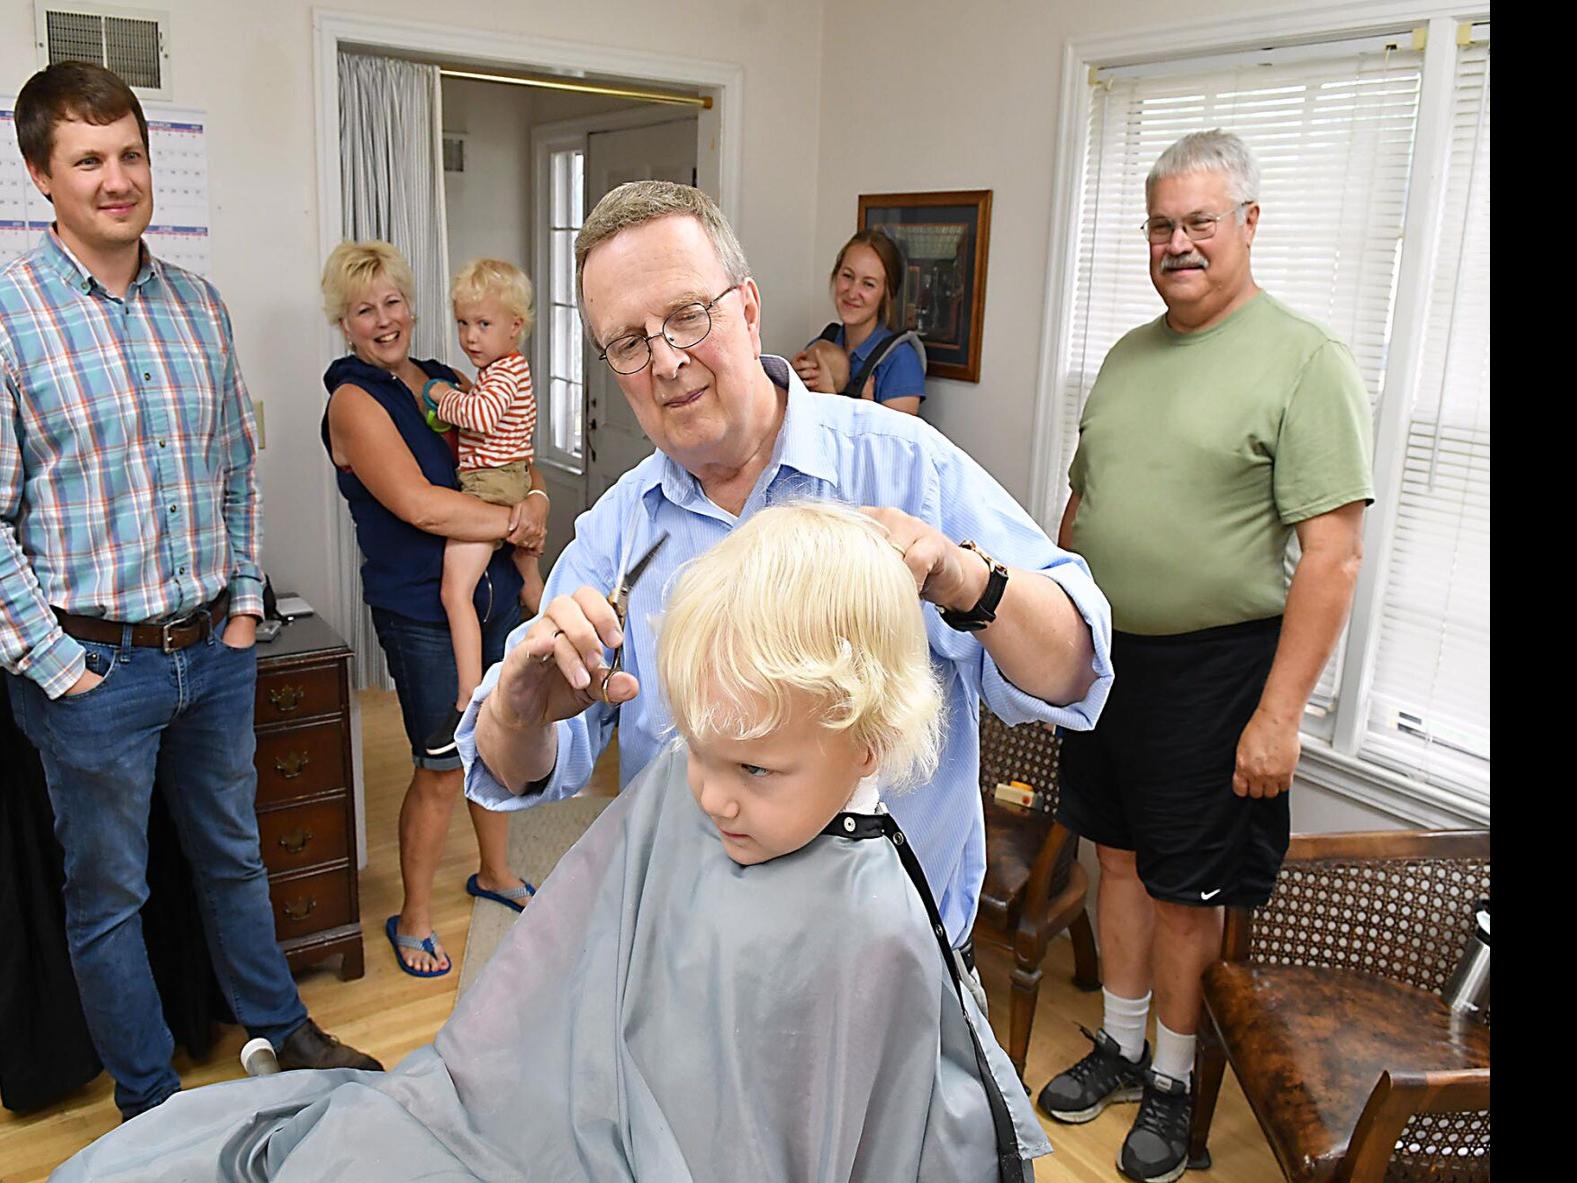 Brady's retirement hits close to home at local barber shop